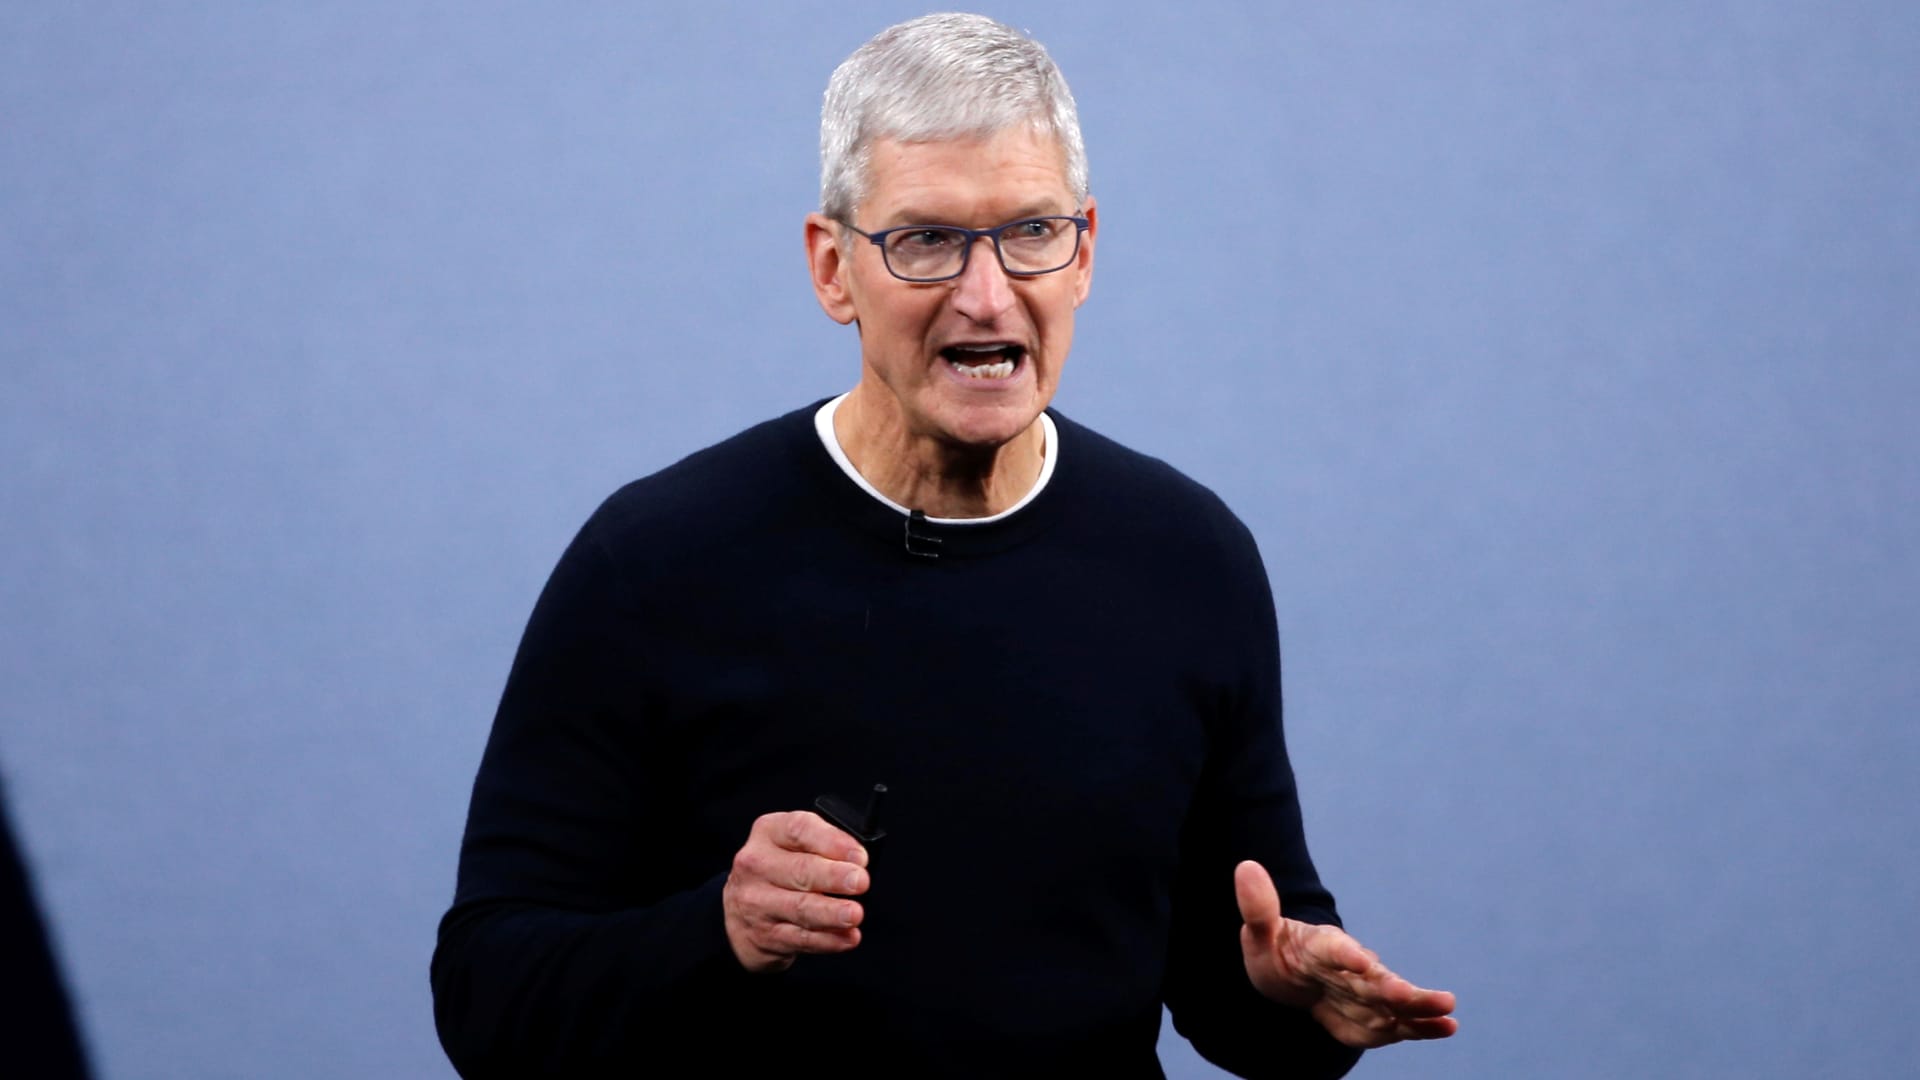 CEO Tim Cook speaks at an Apple event at the company's headquarters in Cupertino, California, September 10, 2019.